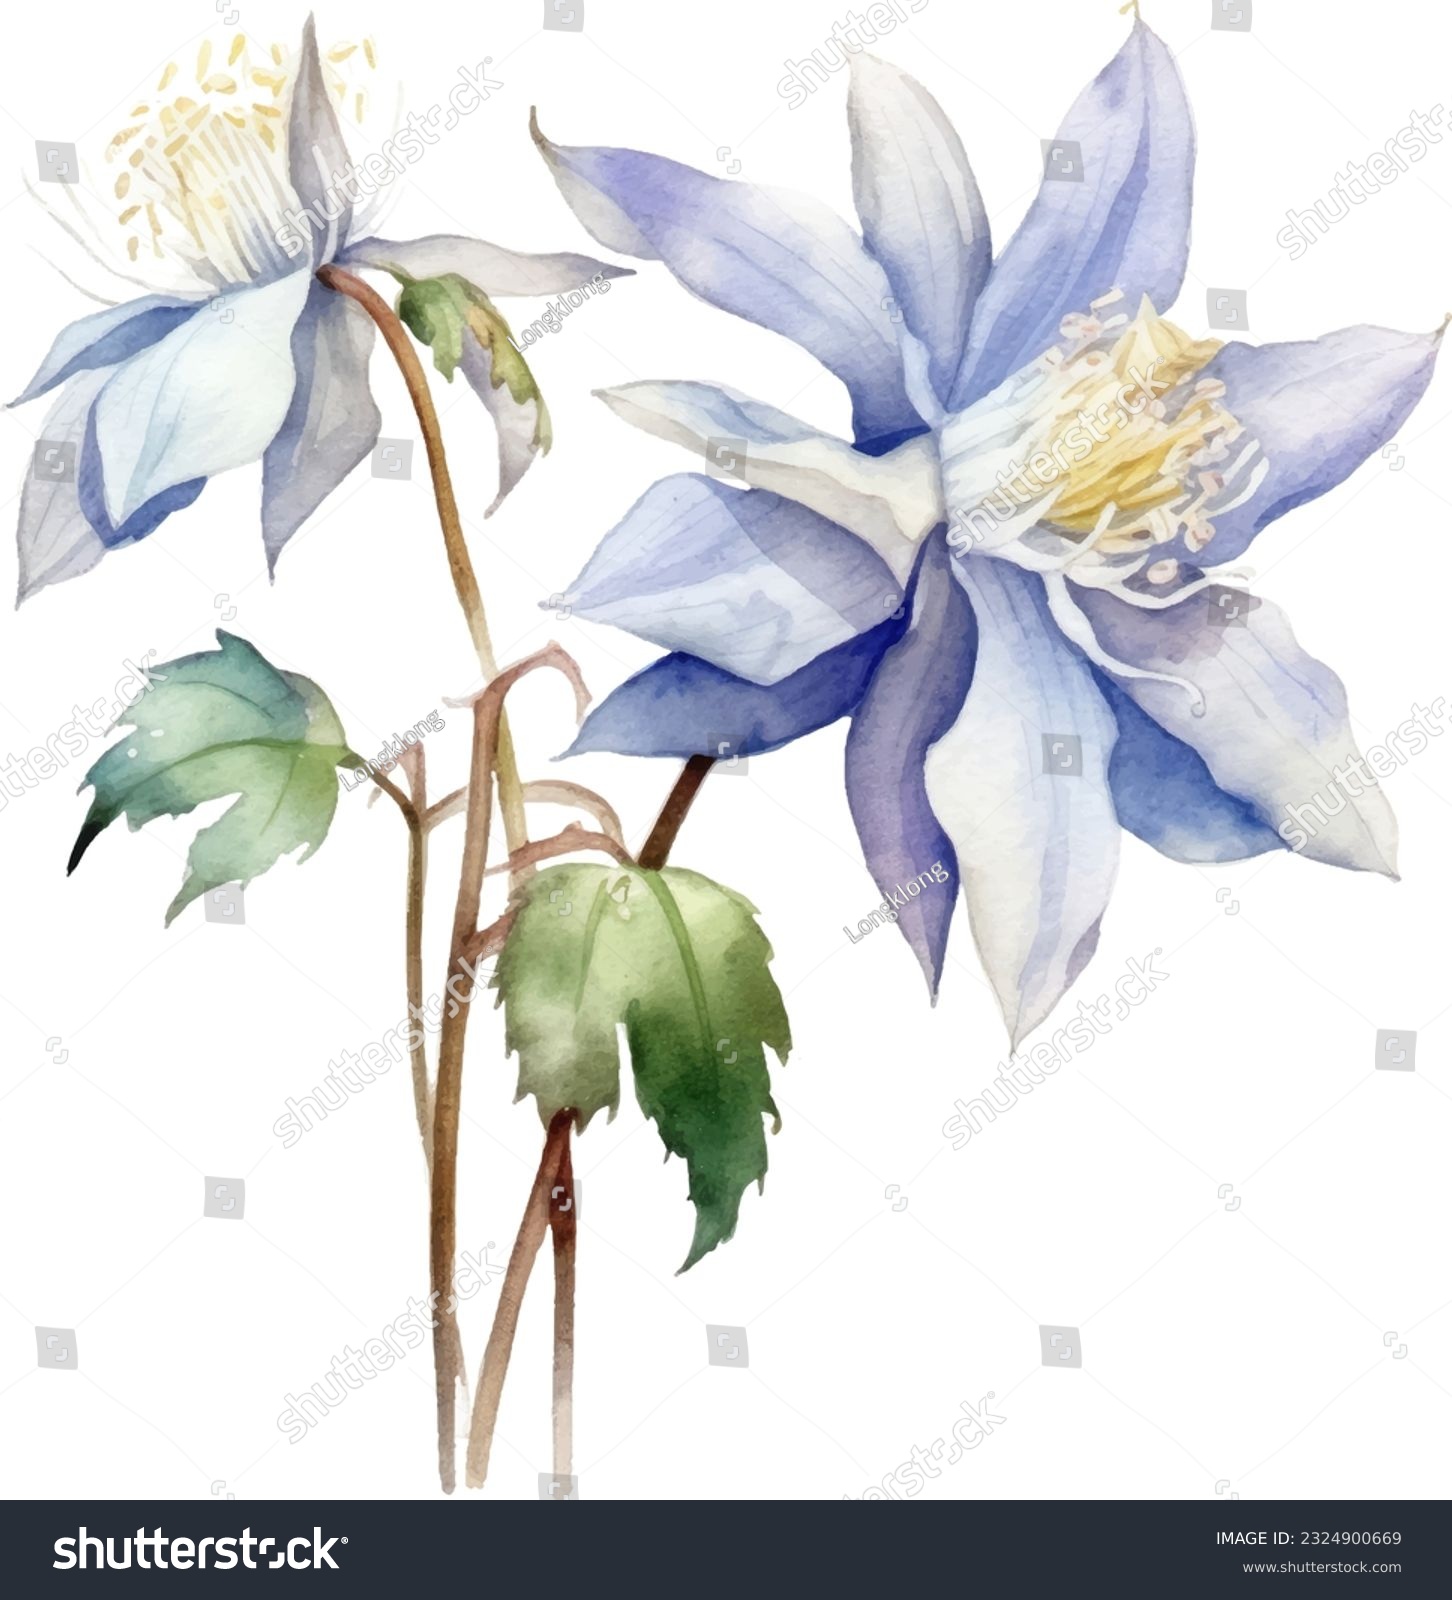 Columbine Watercolor illustration. Hand drawn underwater element design. Artistic vector marine design element. Illustration for greeting cards, printing and other design projects. #2324900669